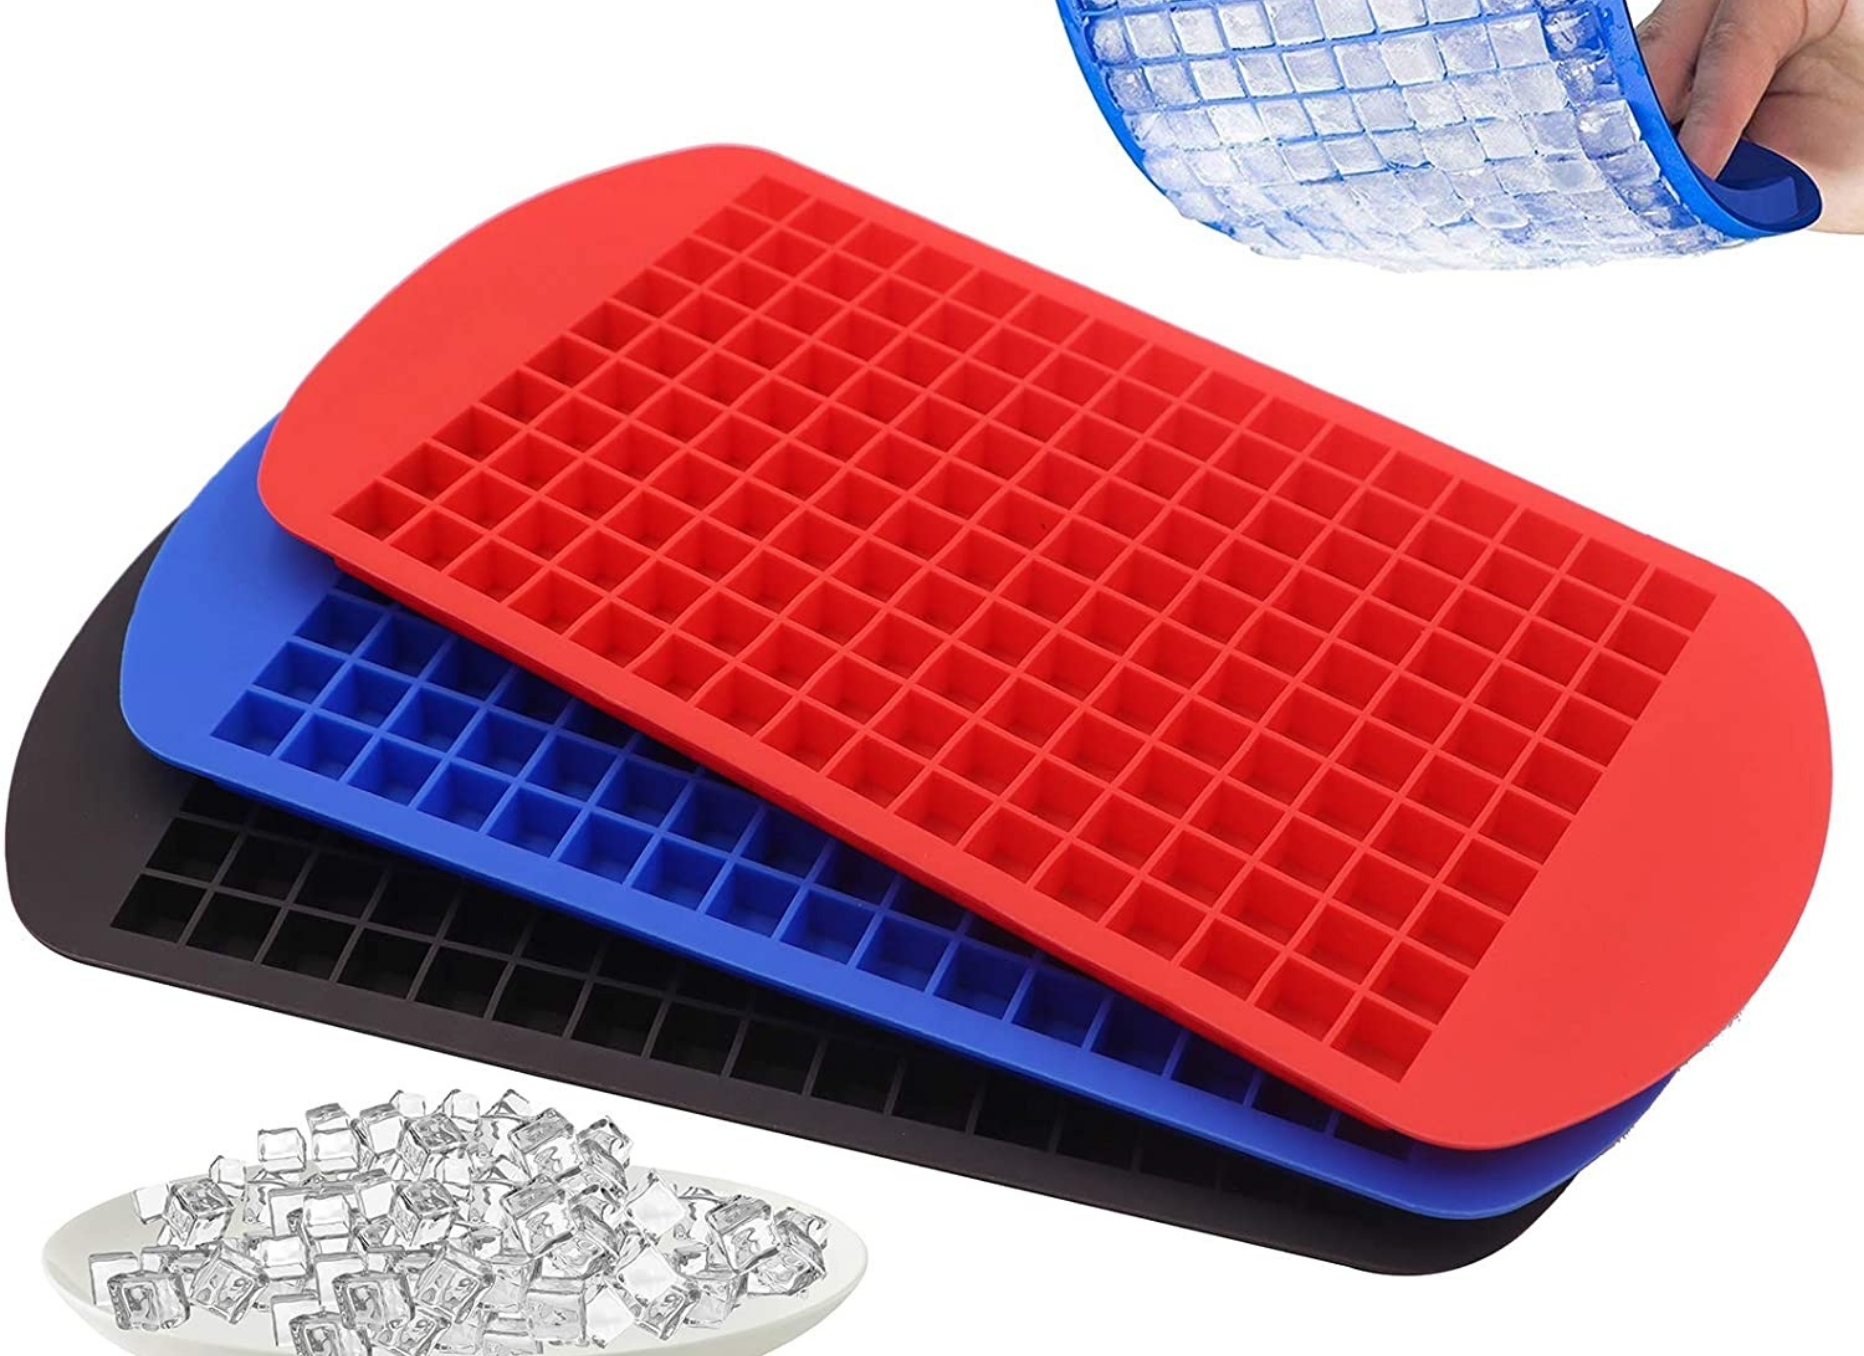 Creates Perfect Ice for Water Bottles 2 Mini Ice Cube Trays with Lids Great Size for Small Dorm Freezers Campers and RVs with No Spill Covers by Bluamour Blue 